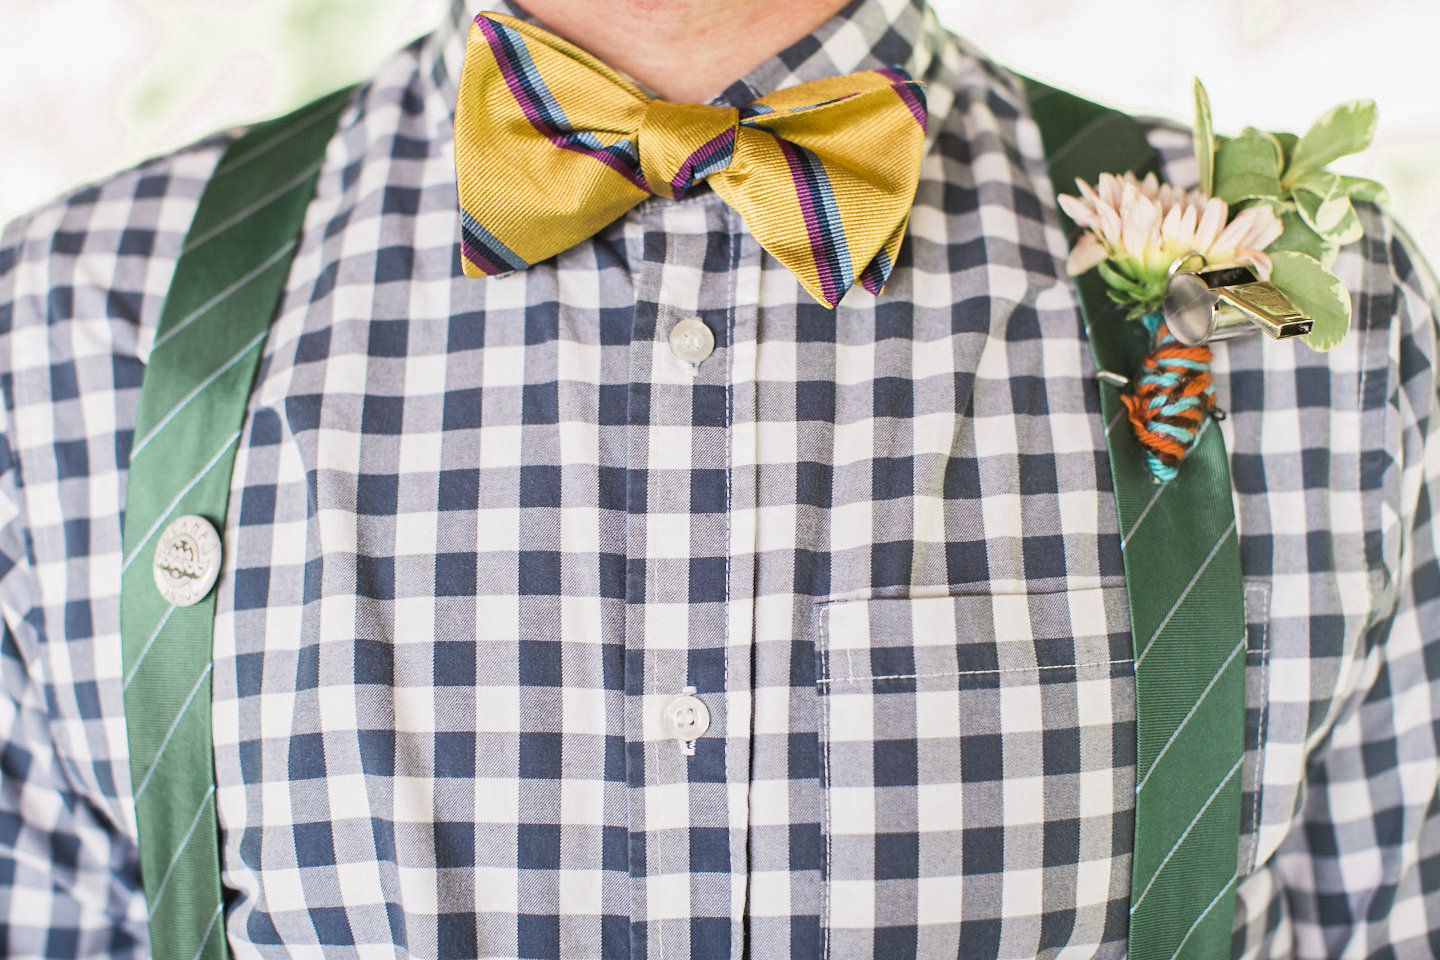 ivory-and-beau-savannah-wedding-planner-summer-camp-themed-wedding-the-tie-bar-whistle-boutonniere-moonrise-kingdom-buttons-Apt.BPhotography_SummerCamp(57of222).jpg